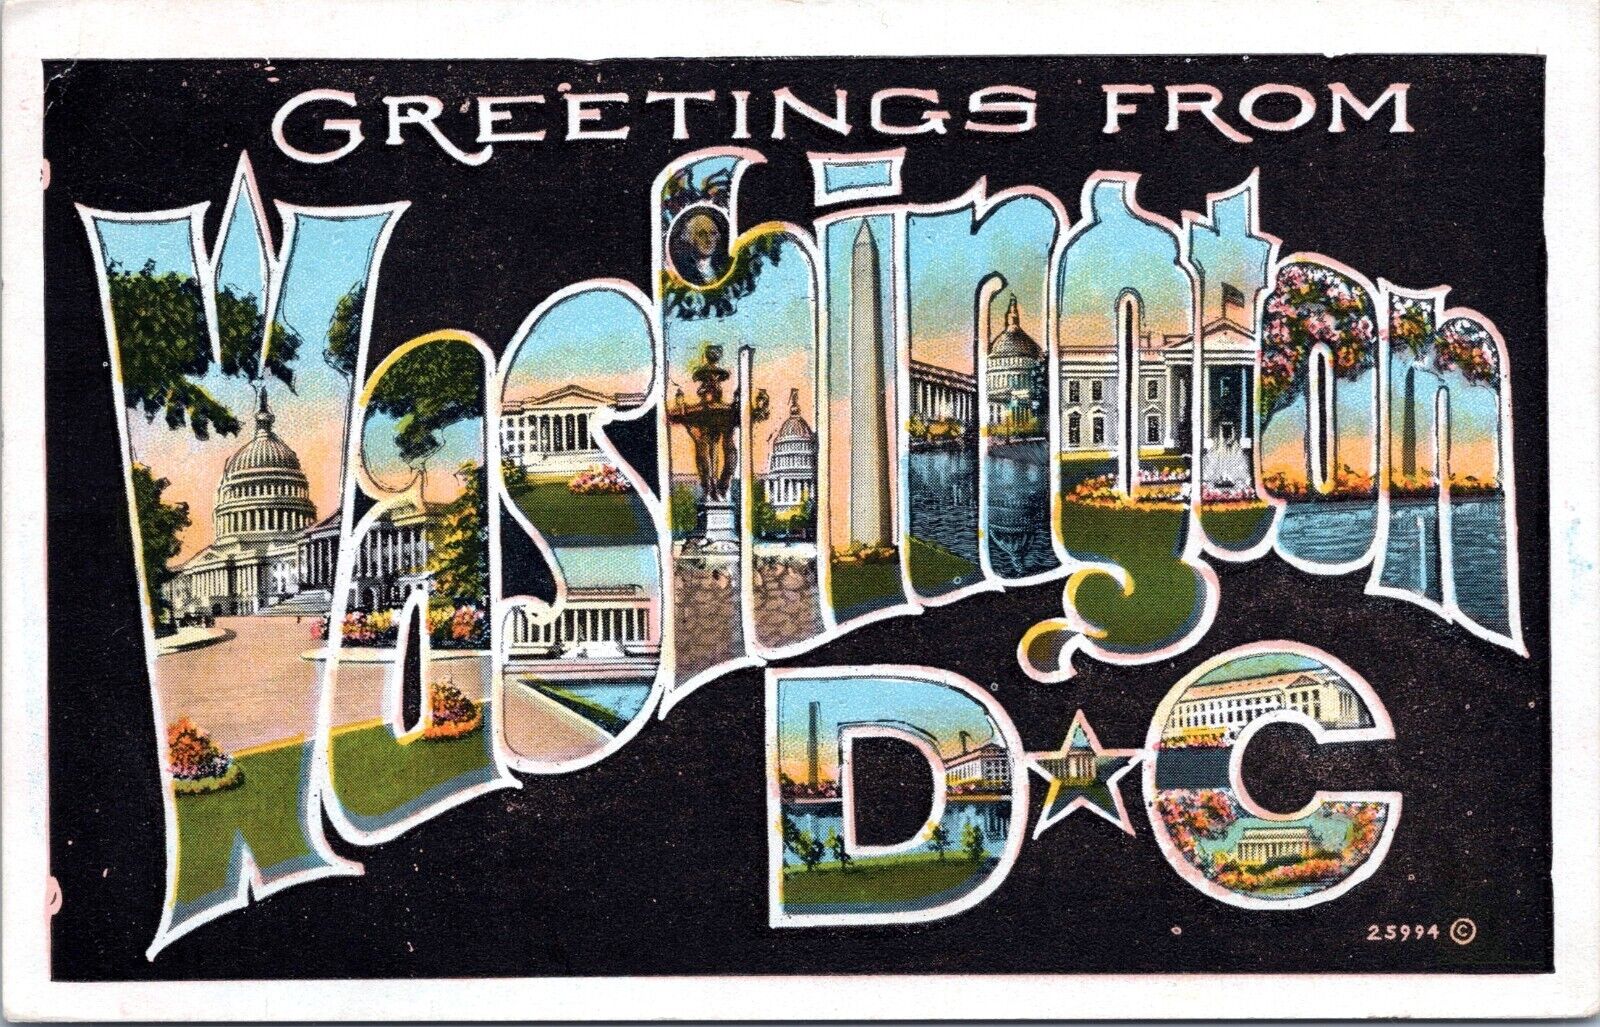 Large Letter Greetings from Washington DC - 1930 Posted white border Postcard